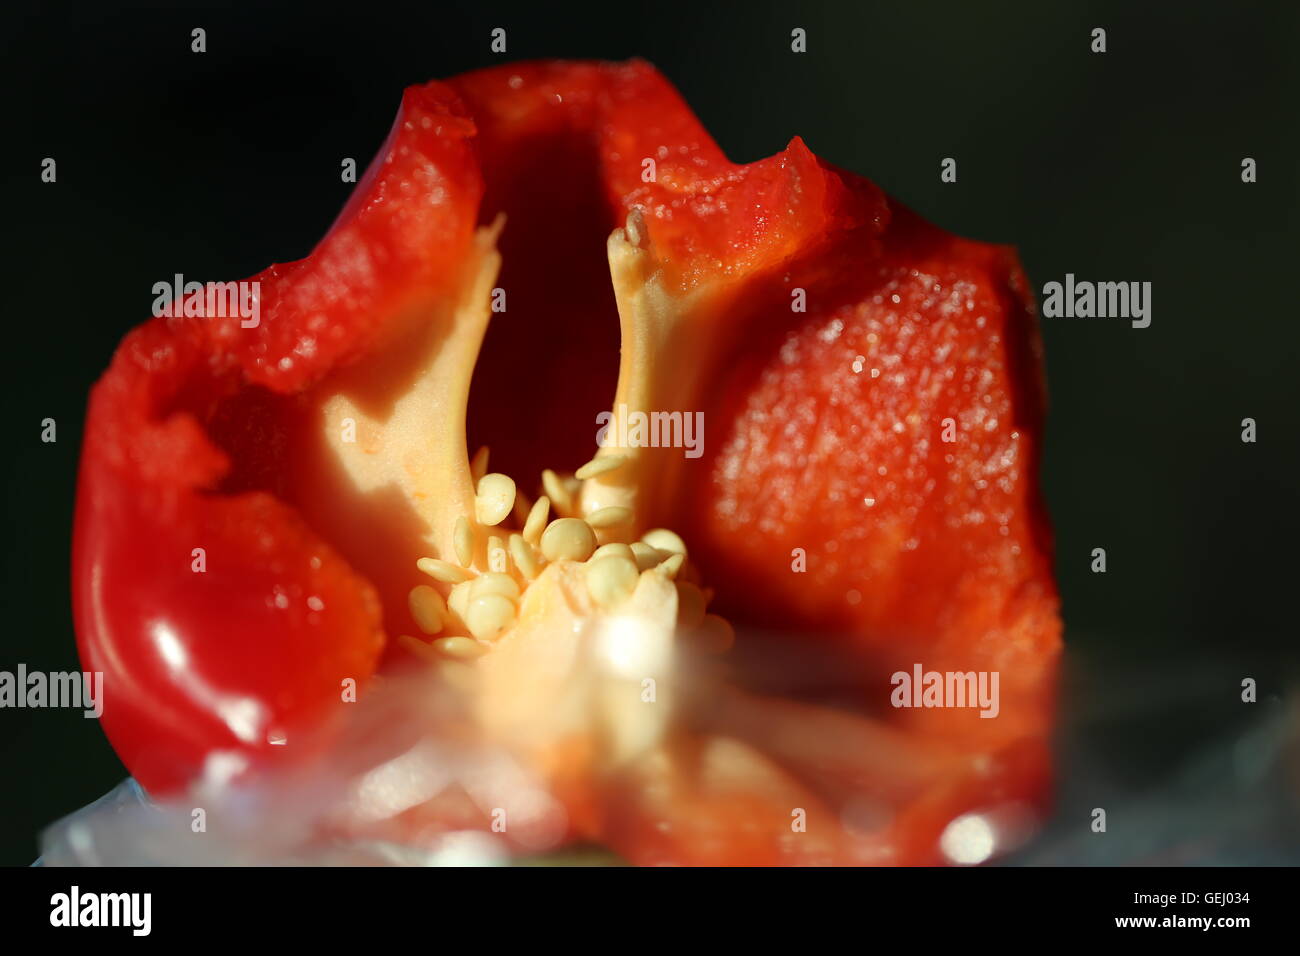 Red Pepper During Eating.  Red bell pepper while being eaten, close up. Inside of bell pepper while eating. Stock Photo